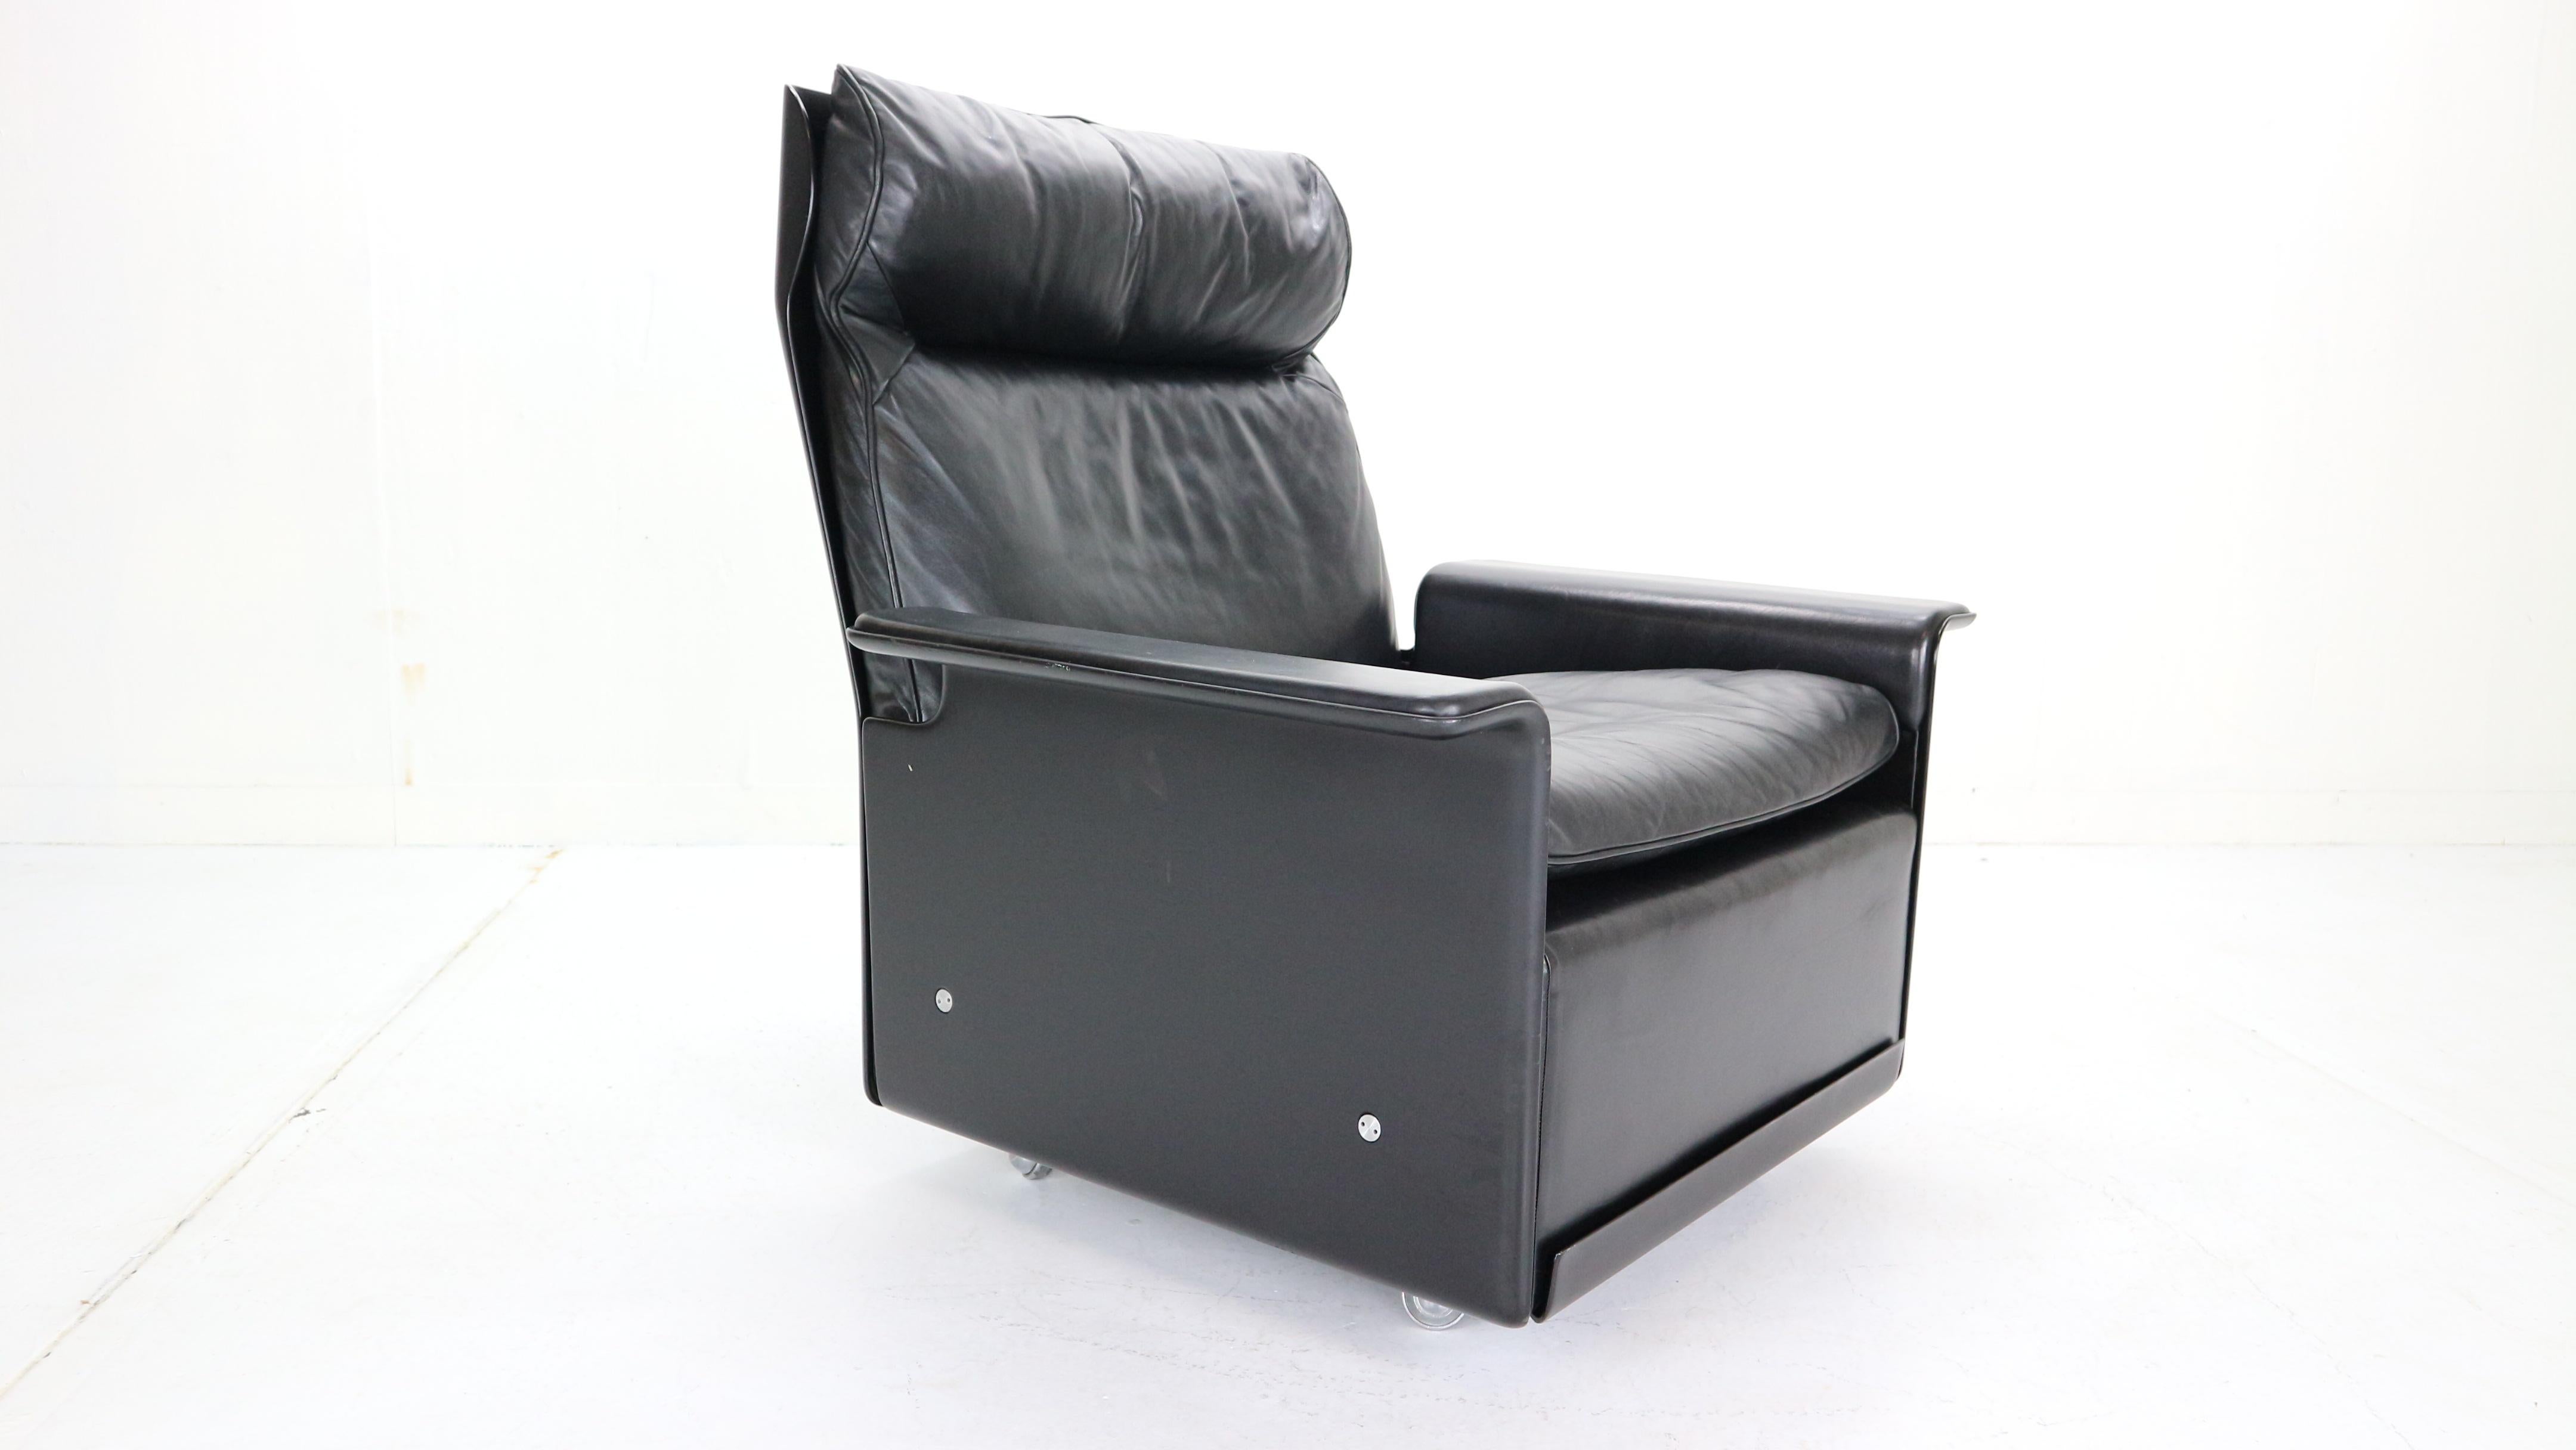 Steel Dieter Rams Set of 2 Black Leather Lounge Chairs Model-620 for Vitsœ, 1970s